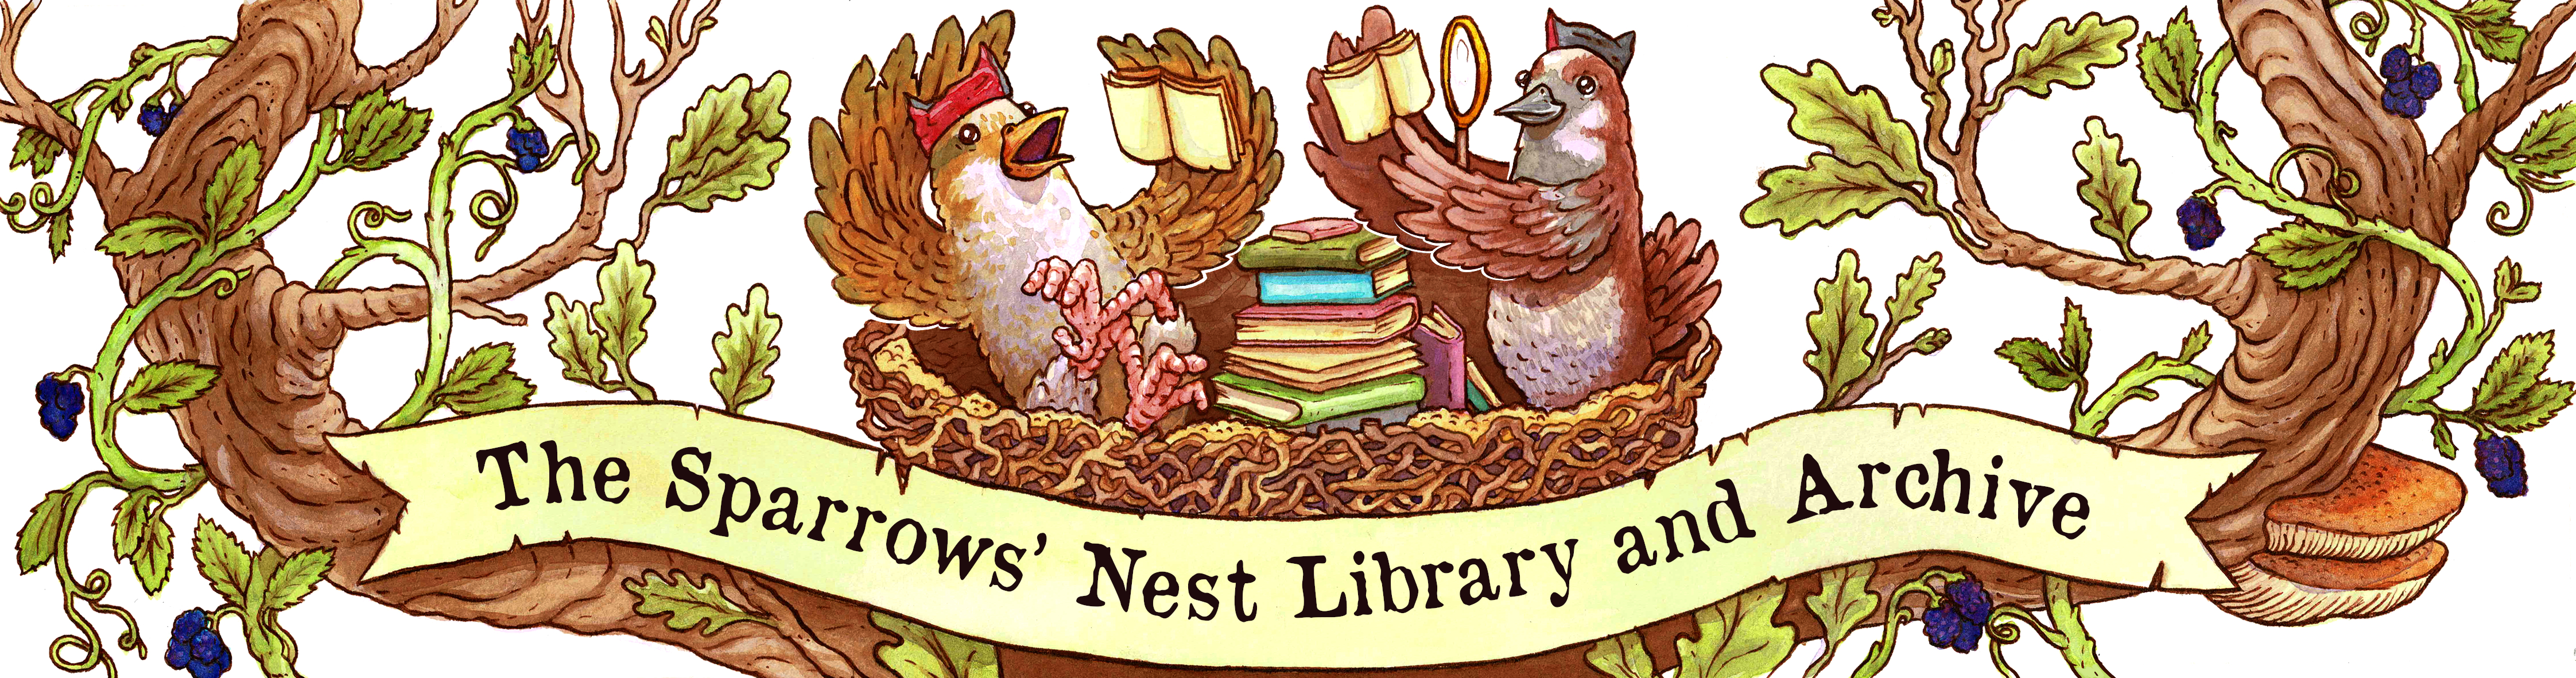 The Sparrows' Nest Library and Archive